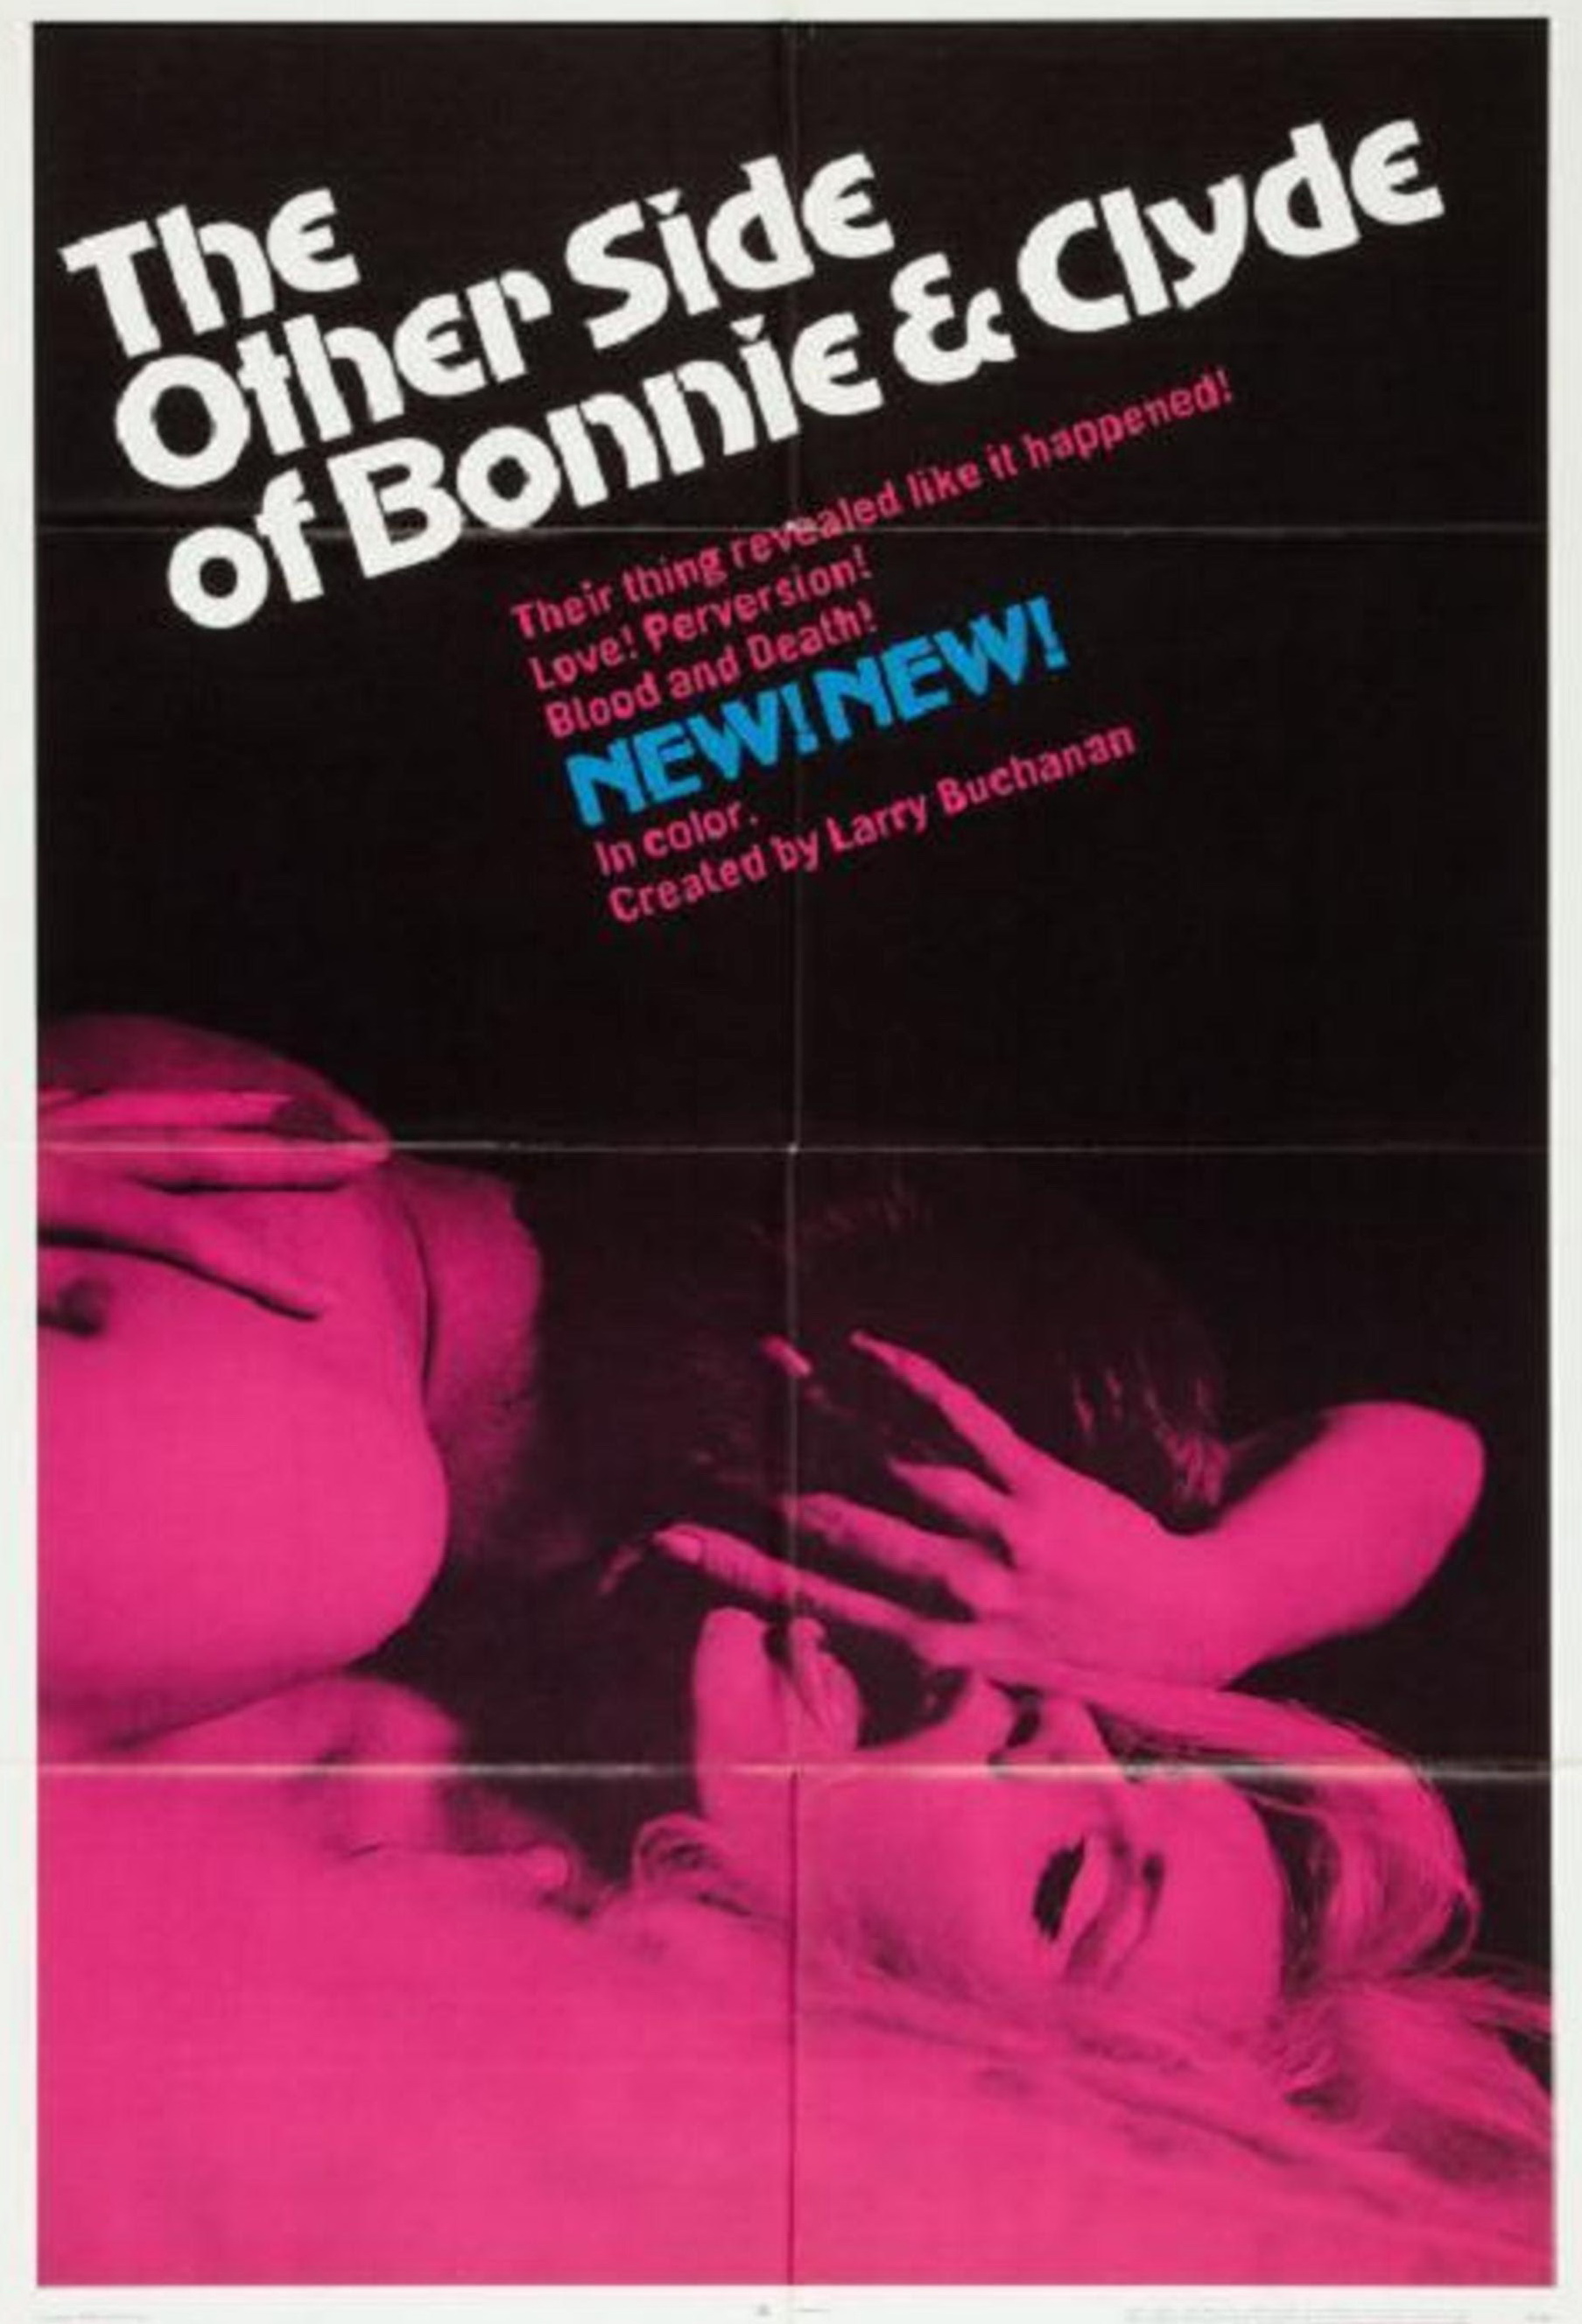 The Other Side of Bonnie and Clyde (1968) Screenshot 5 